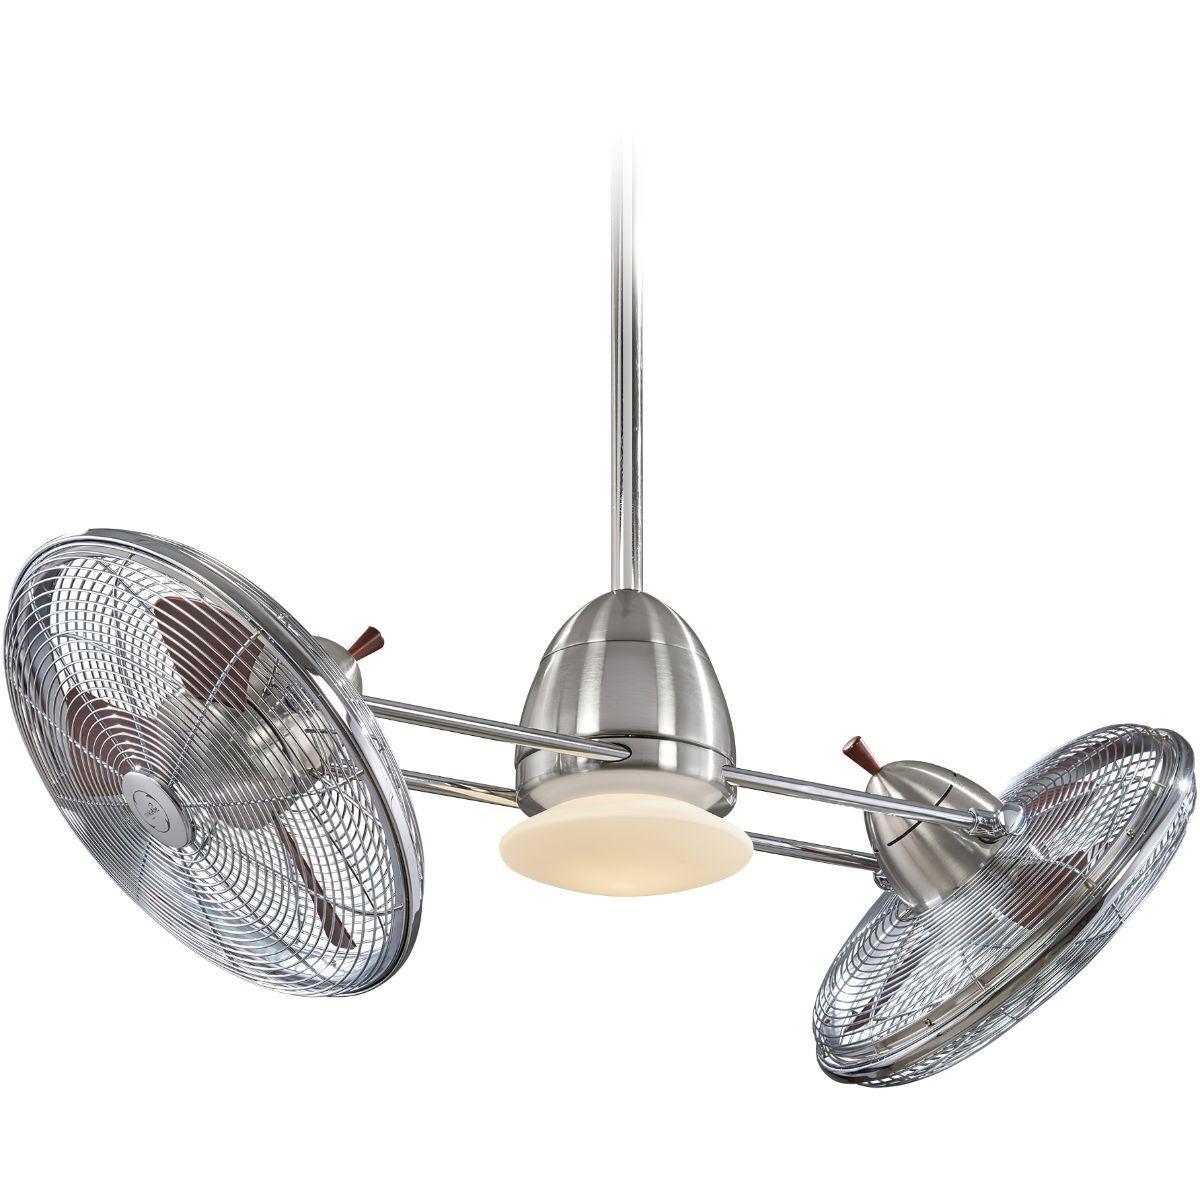 Gyro 42 Inch Modern Dual Ceiling Fan With Light, Wall Control Included